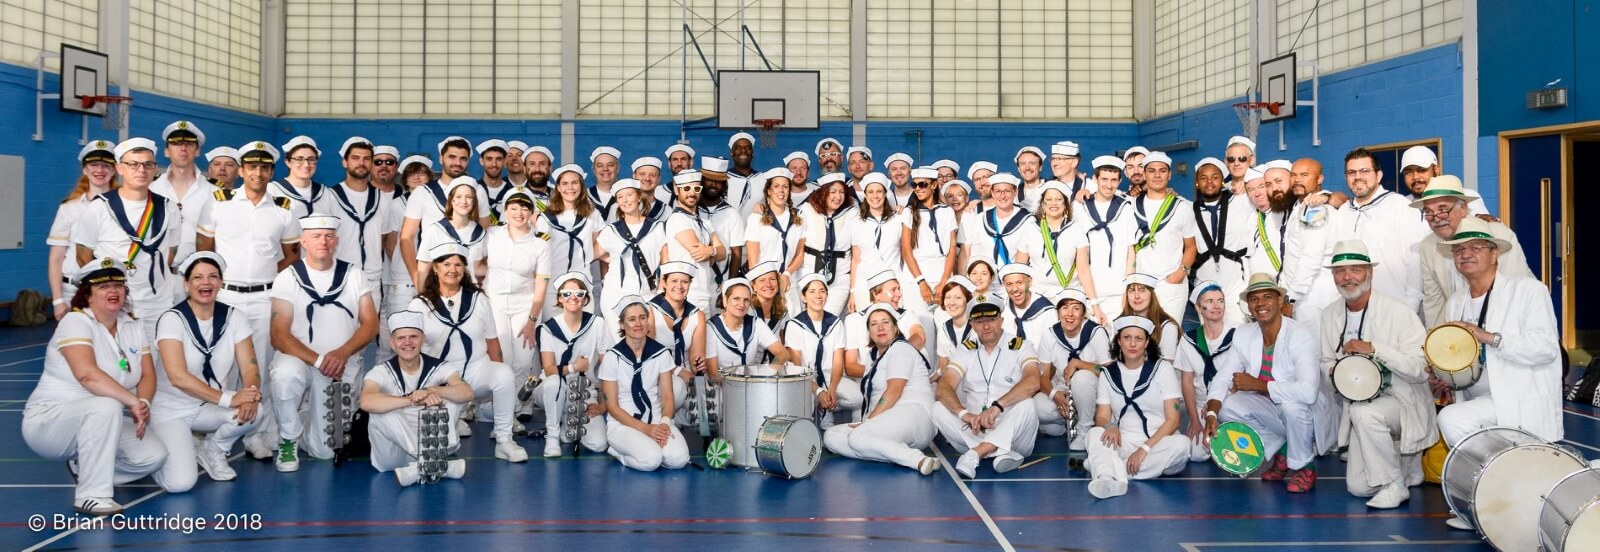 Carnival 2018 - the band group photo, they are dressed in sailor outfits - Copyright Brian Guttridge